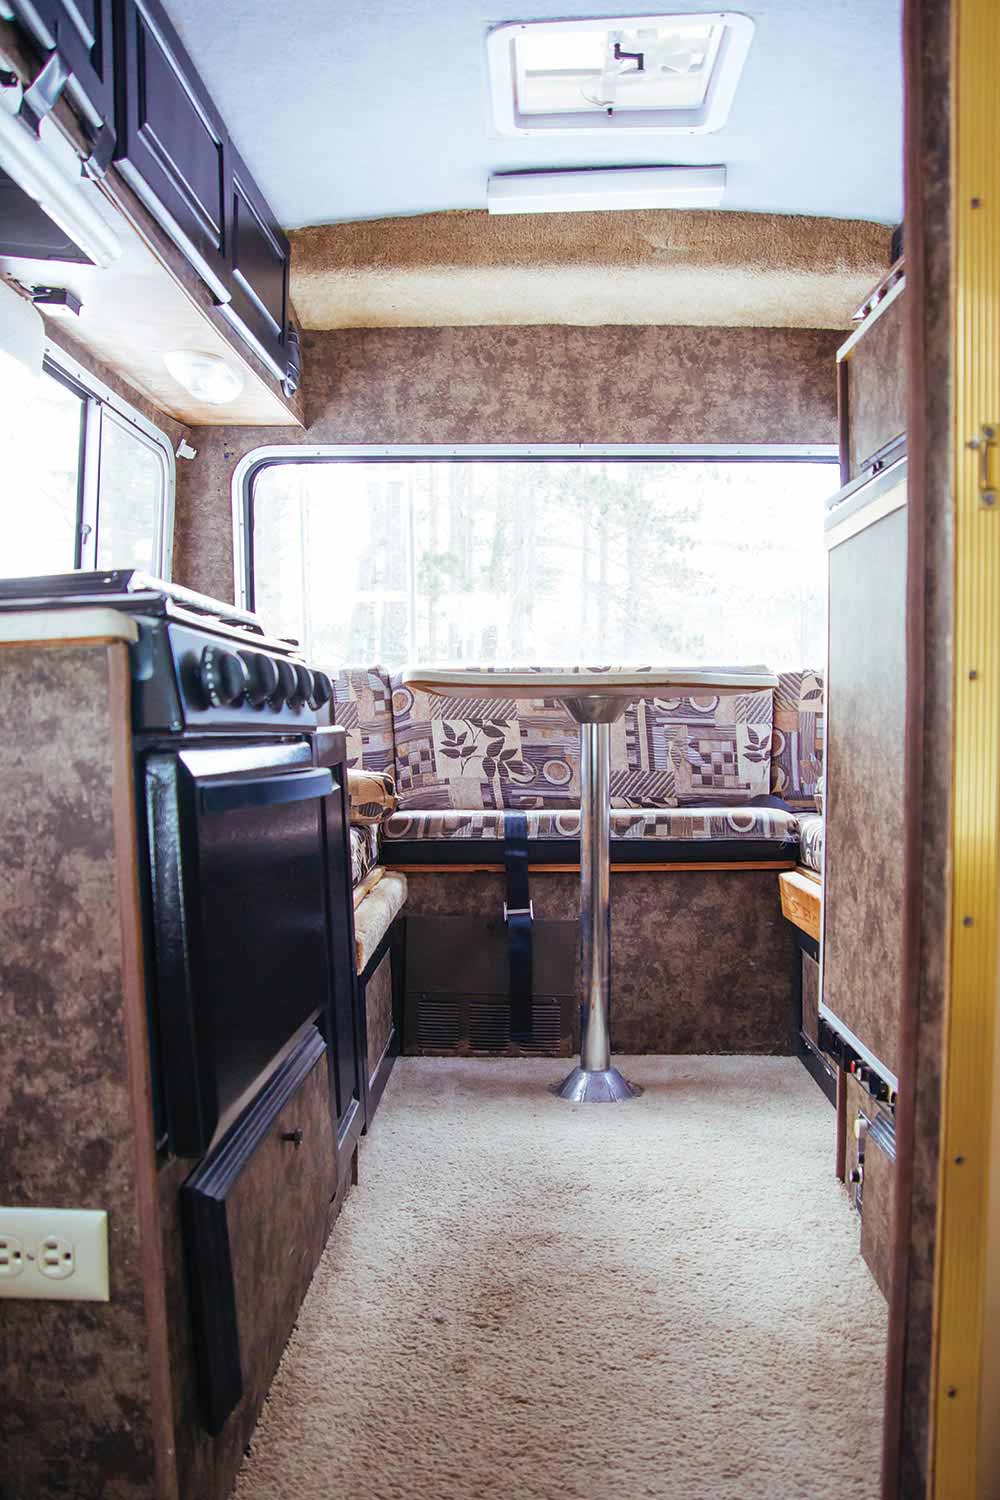 The interior of the Sunrader is straight from the '80s.